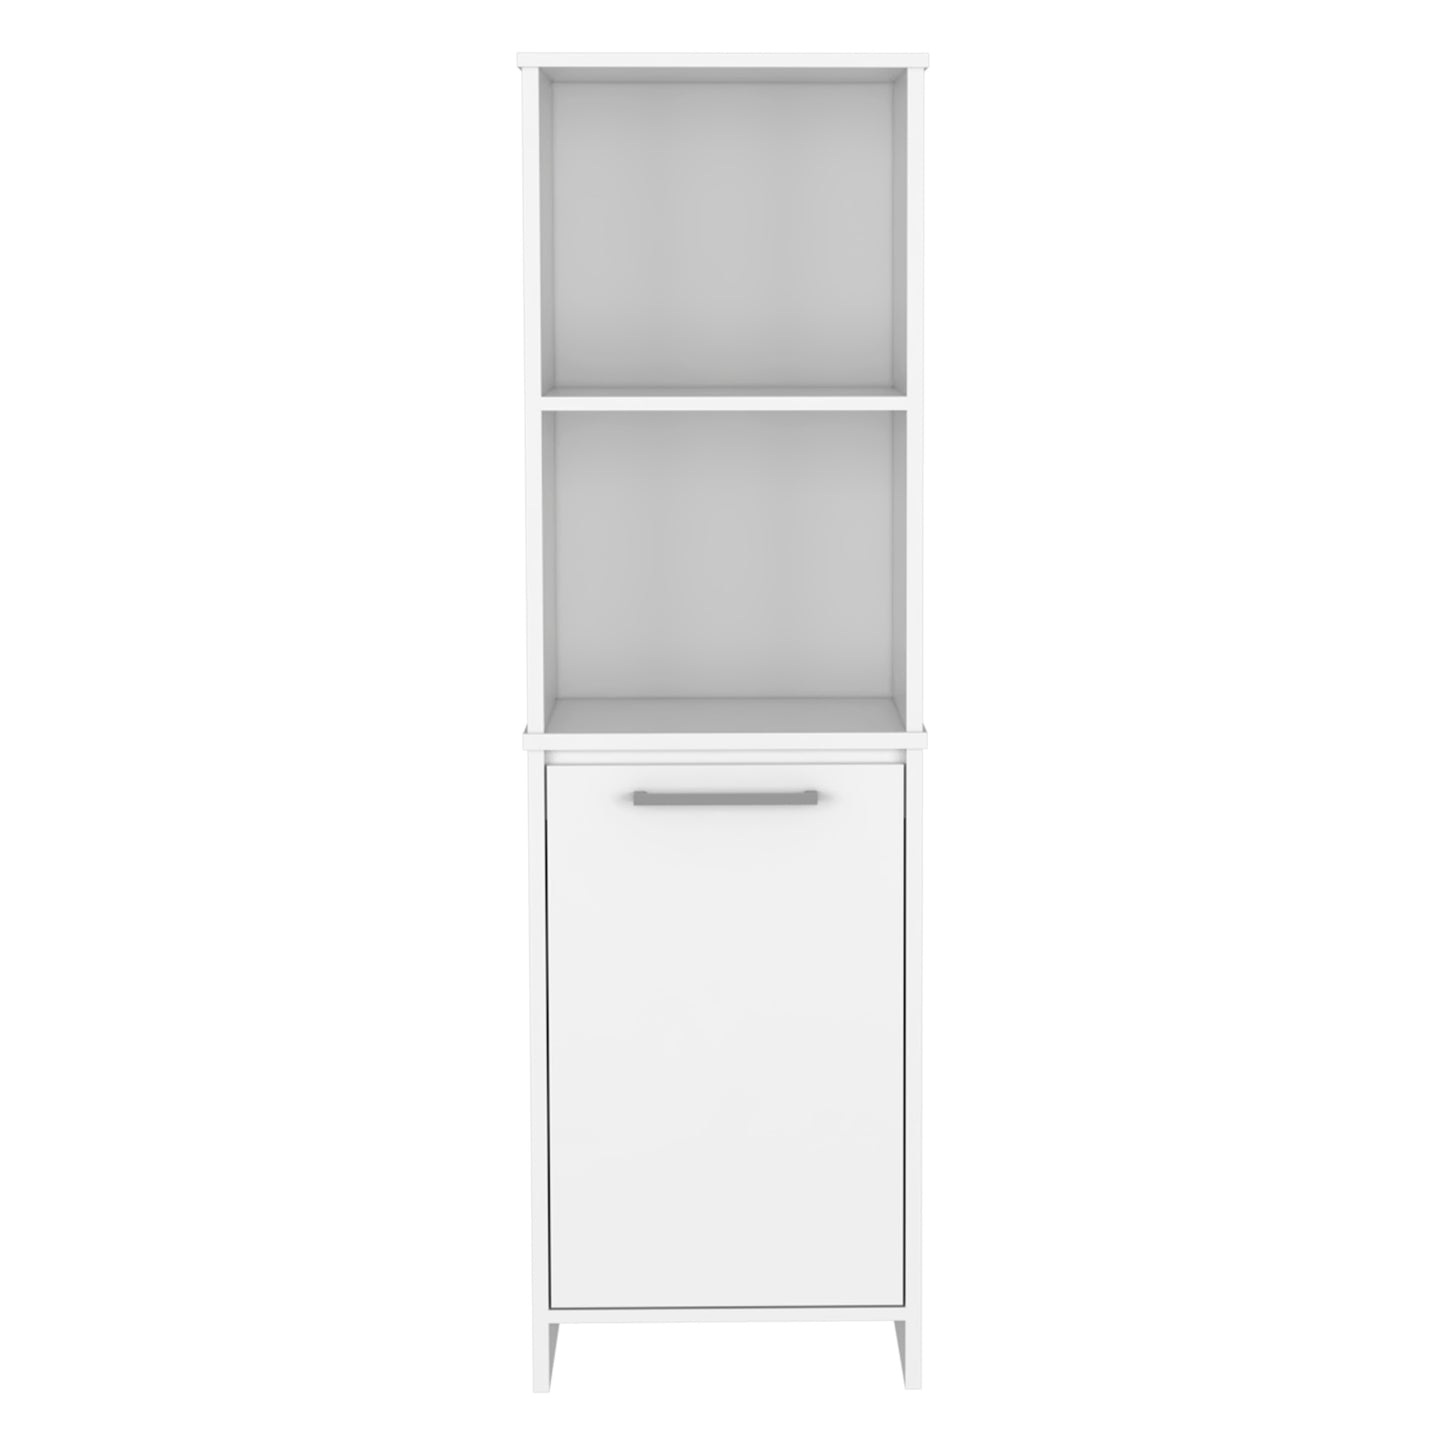 Forester 1-Shelf Pantry Cabinet - White